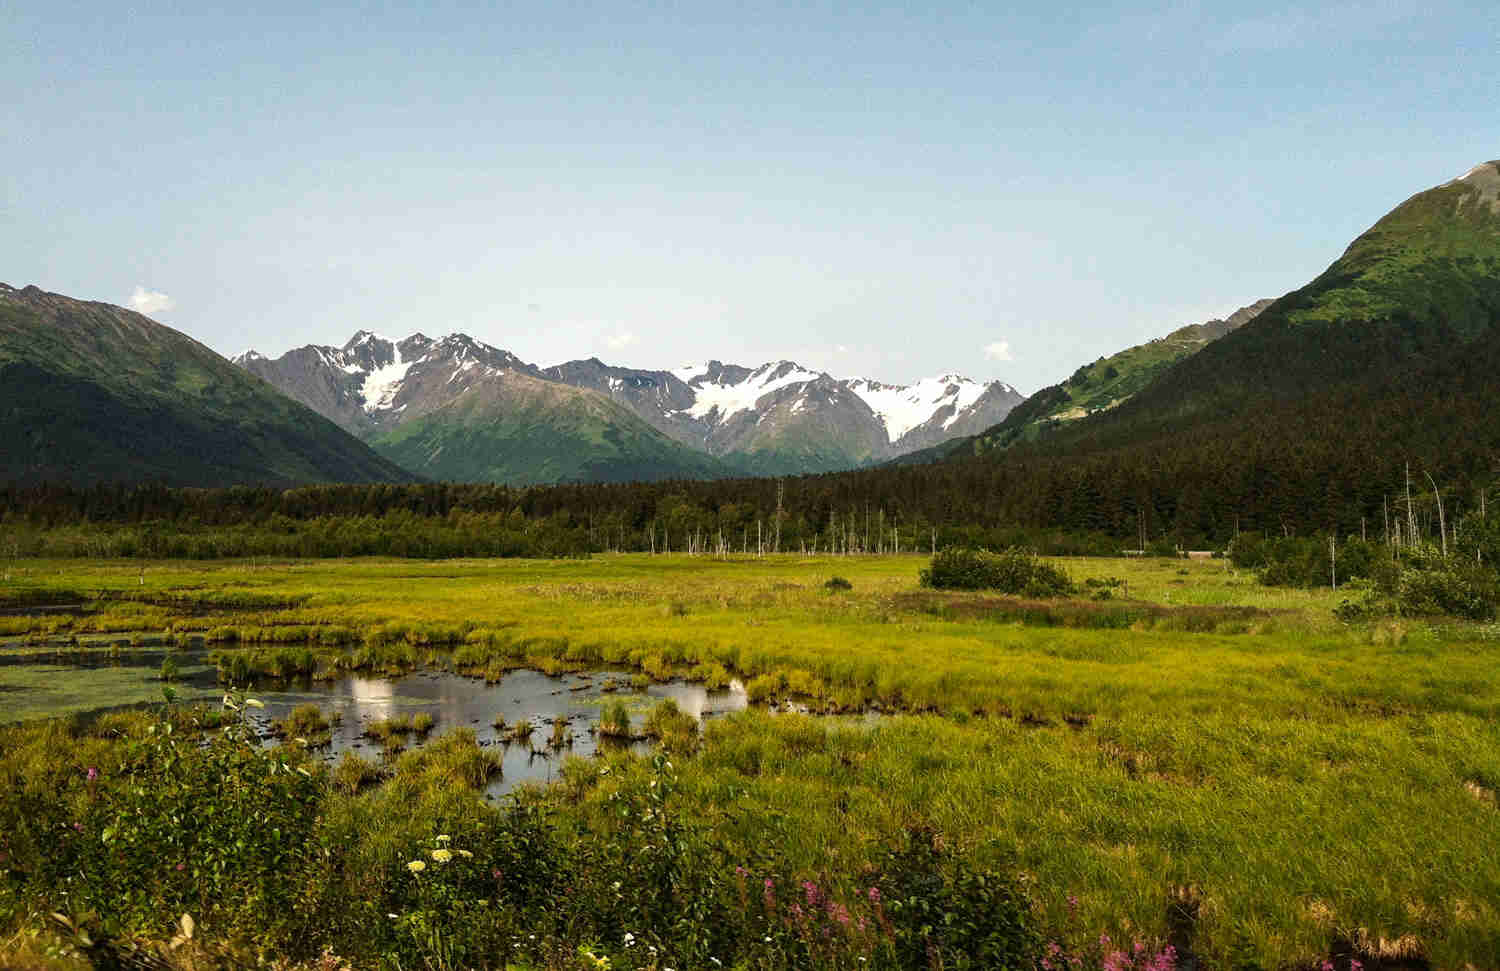 A marshy Alaskan field with trees behind it, and snowy mountains in the background